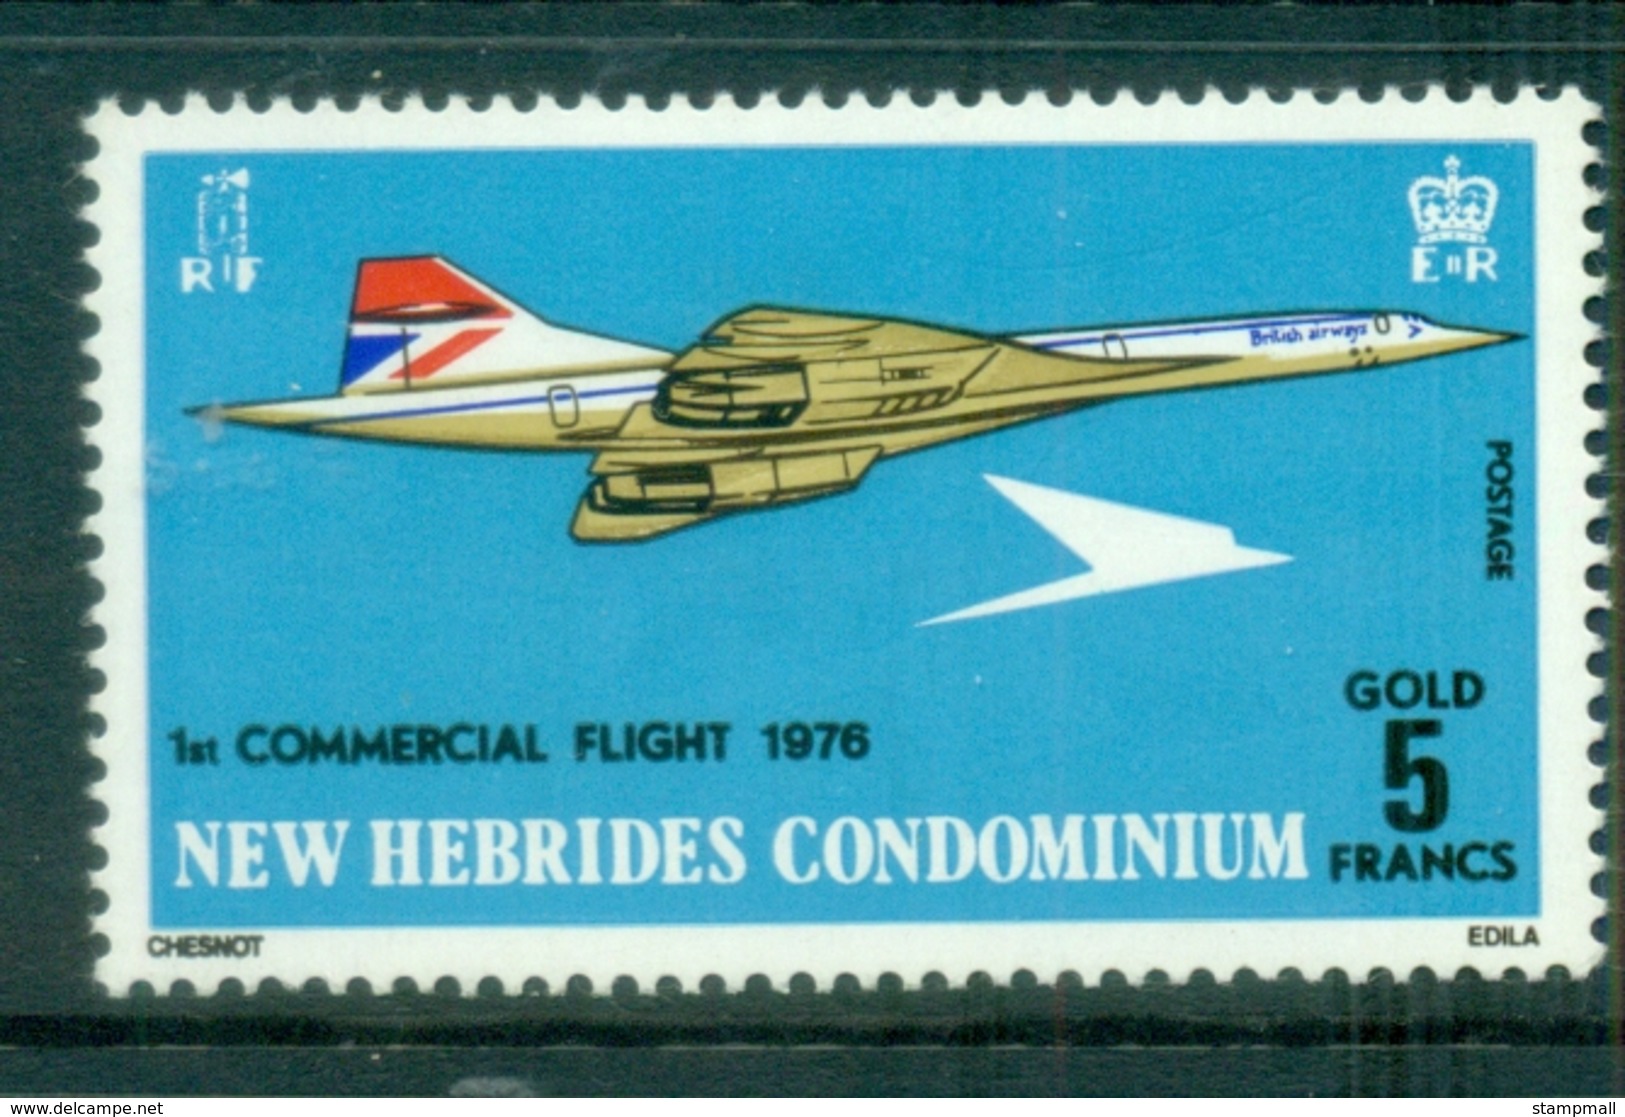 New Hebrides (Br) 1976 Concorde Firsf Commercial Flight FU - Unused Stamps